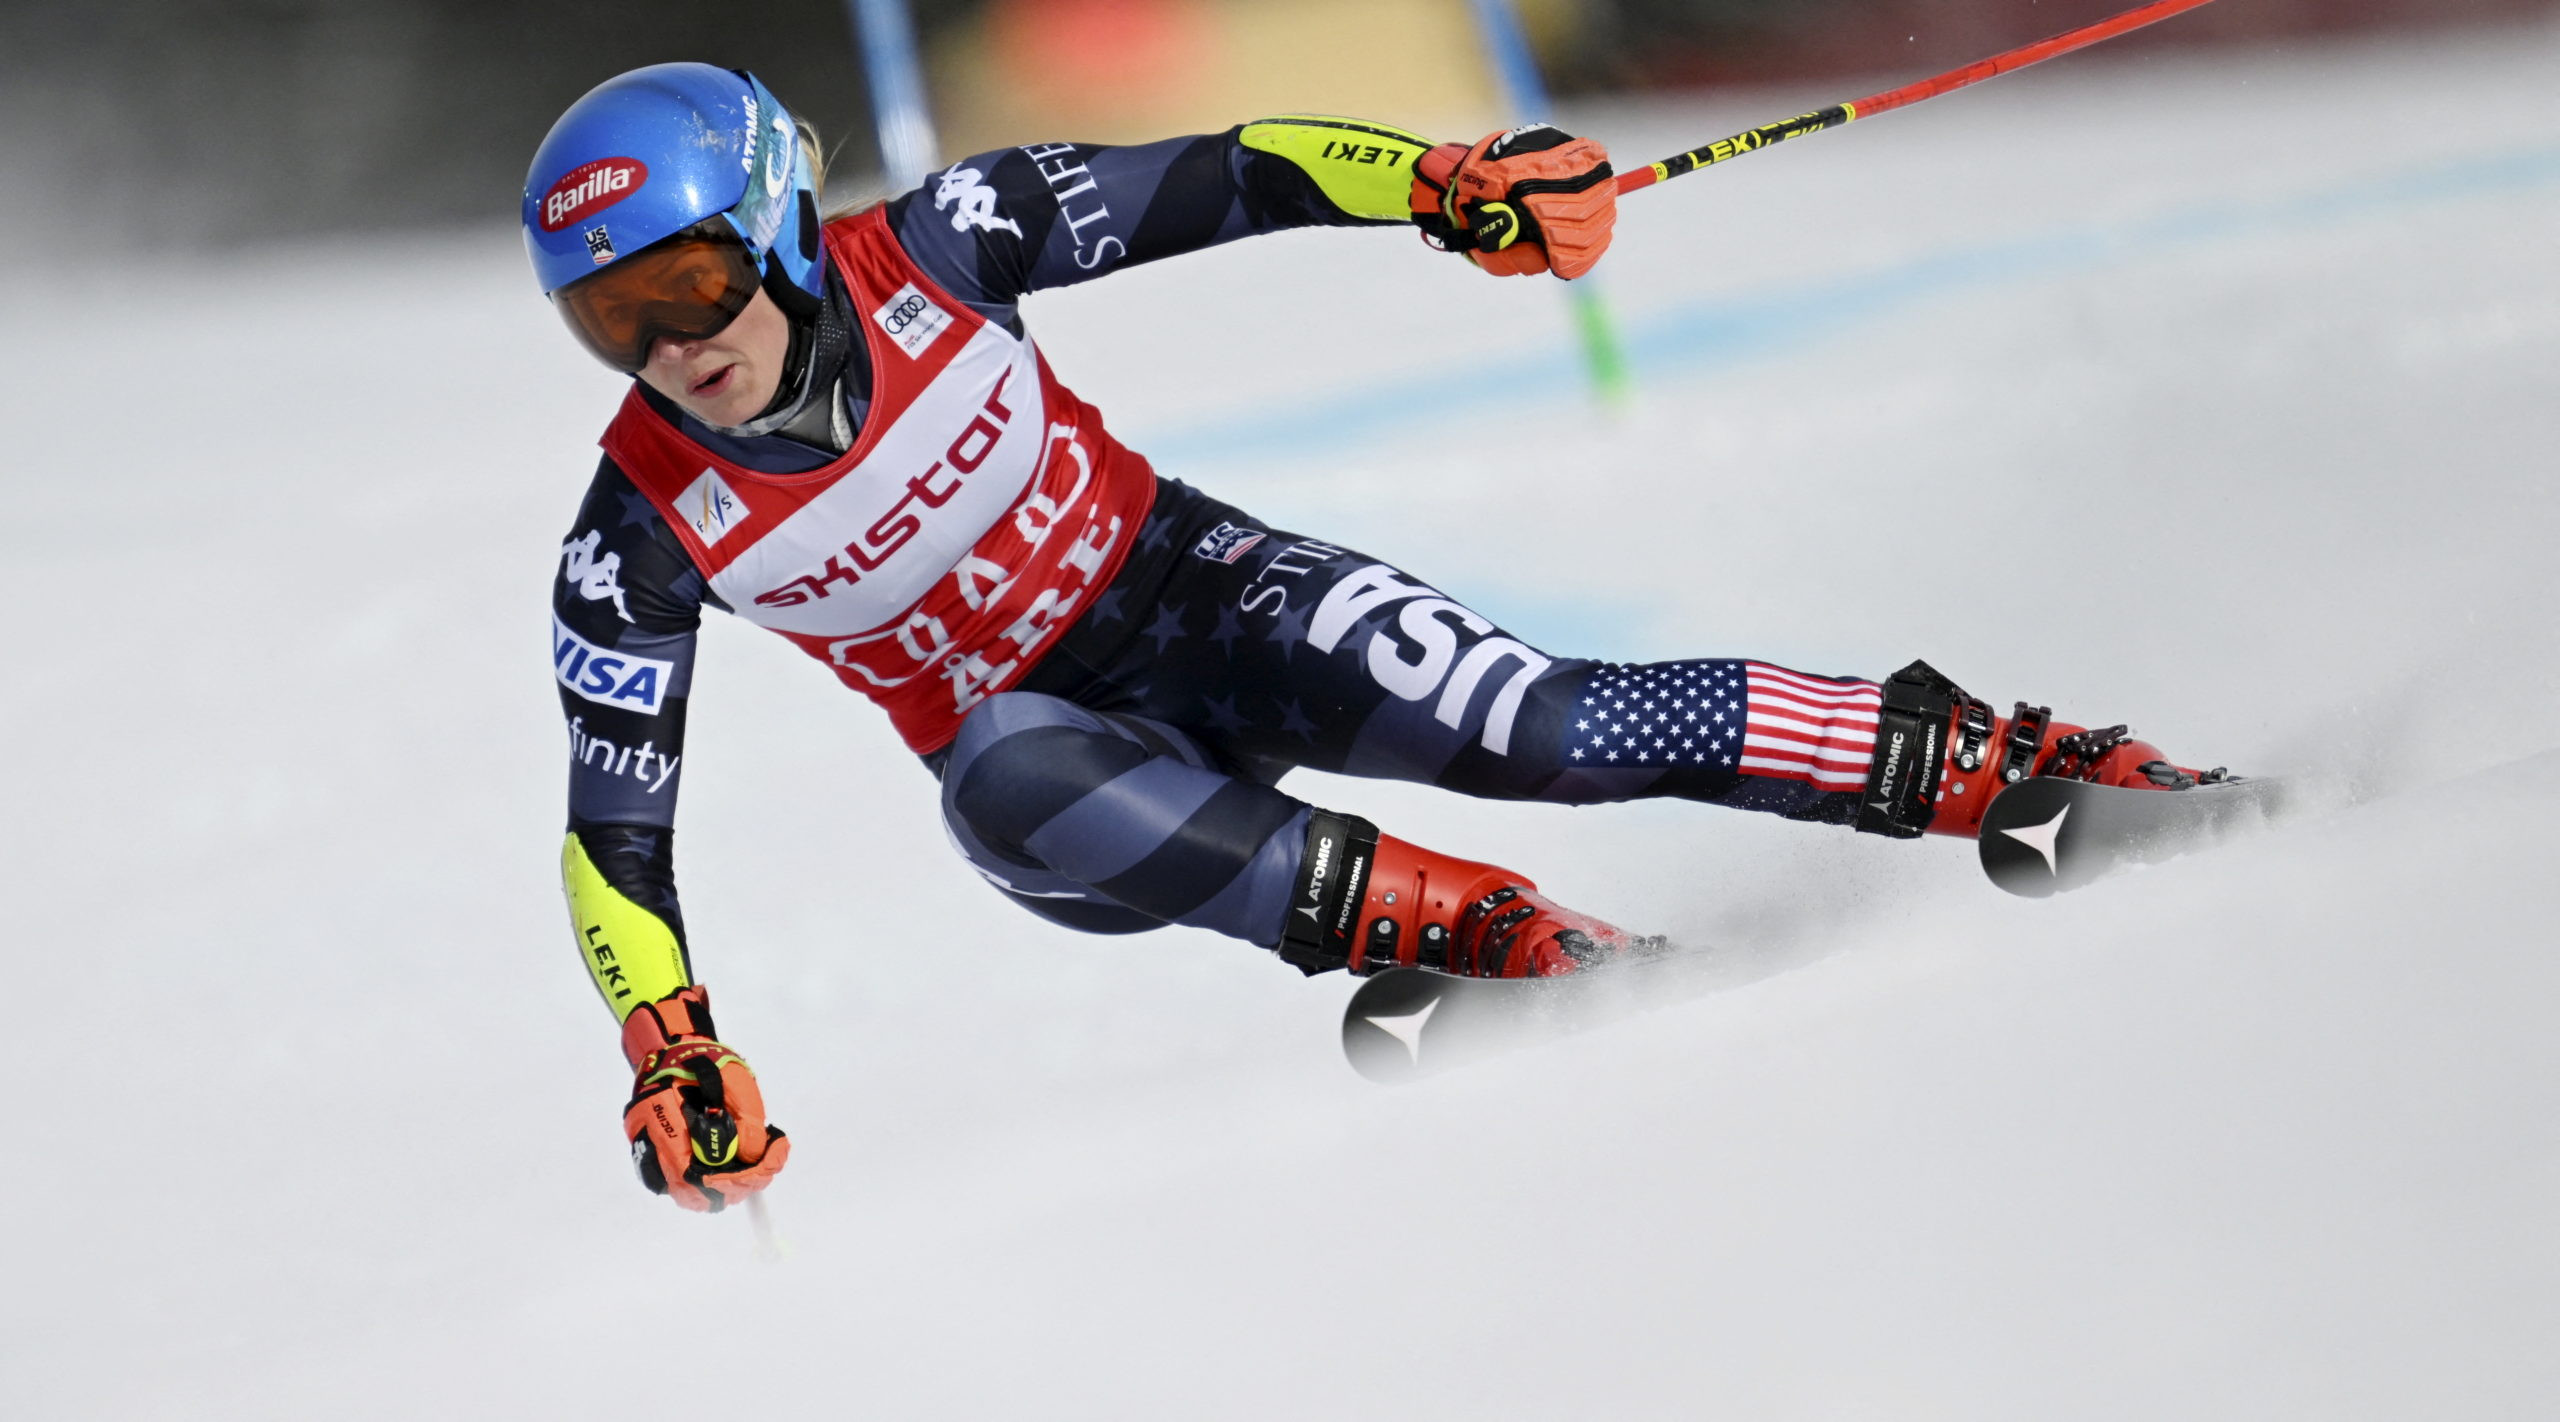 ‘Incredible’ Shiffrin will continue to win: Moser-Proell